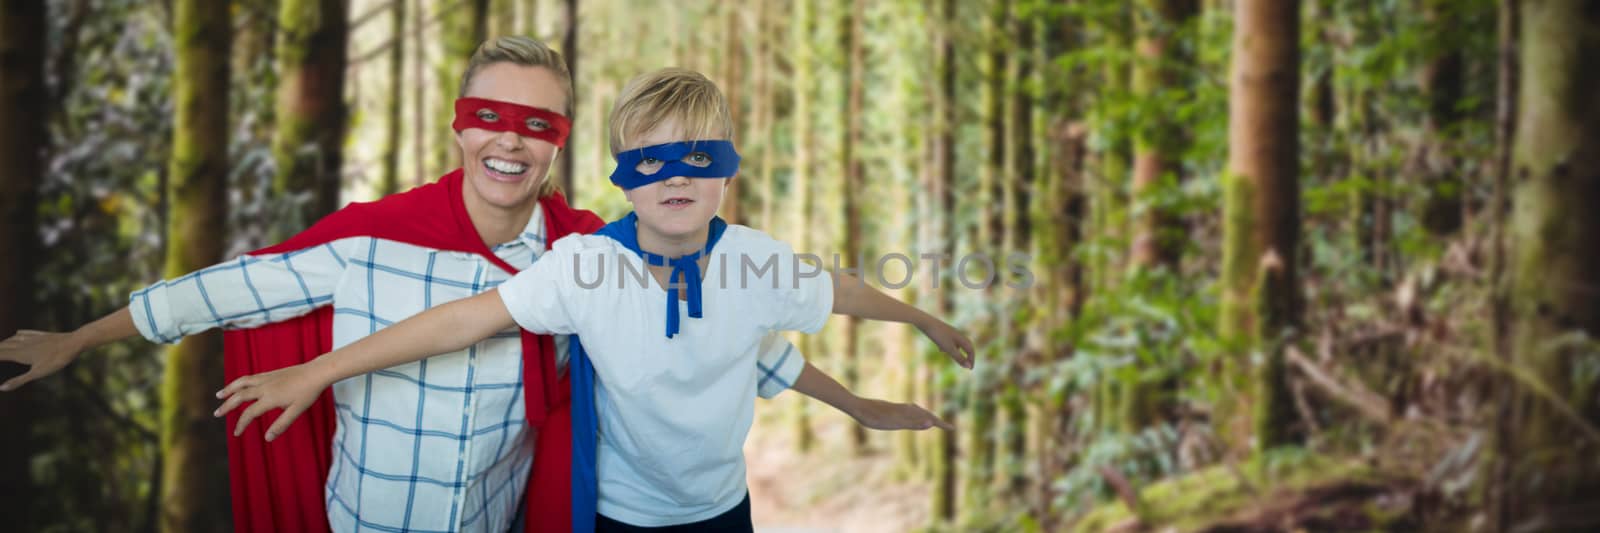 Composite image of mother and son pretending to be superhero by Wavebreakmedia